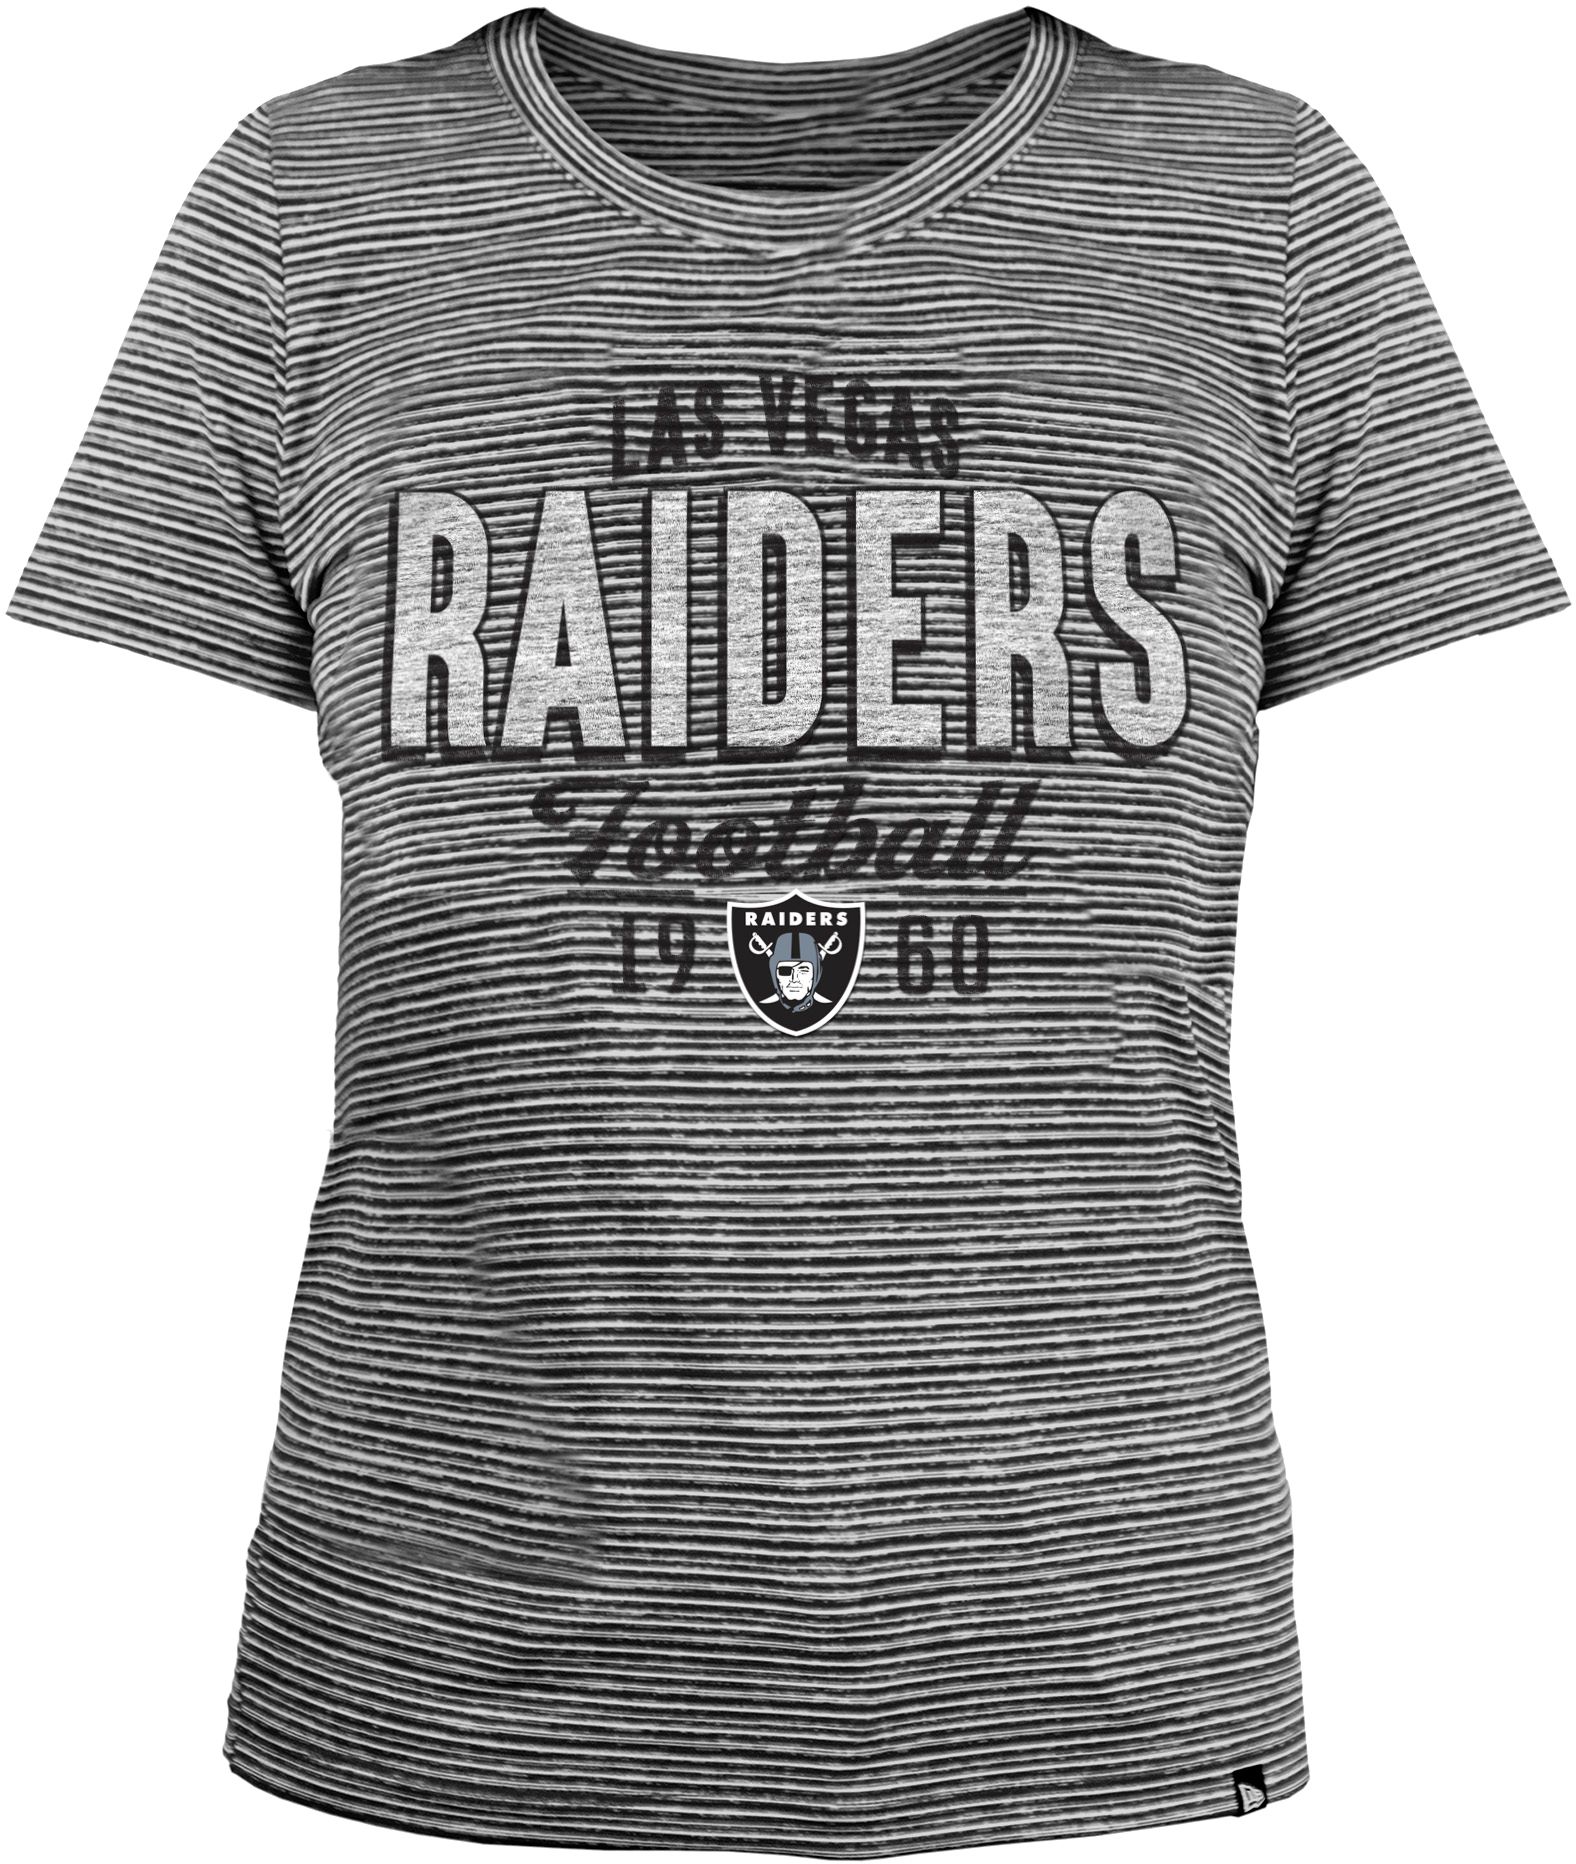 Las Vegas Raiders Women's Apparel  Curbside Pickup Available at DICK'S